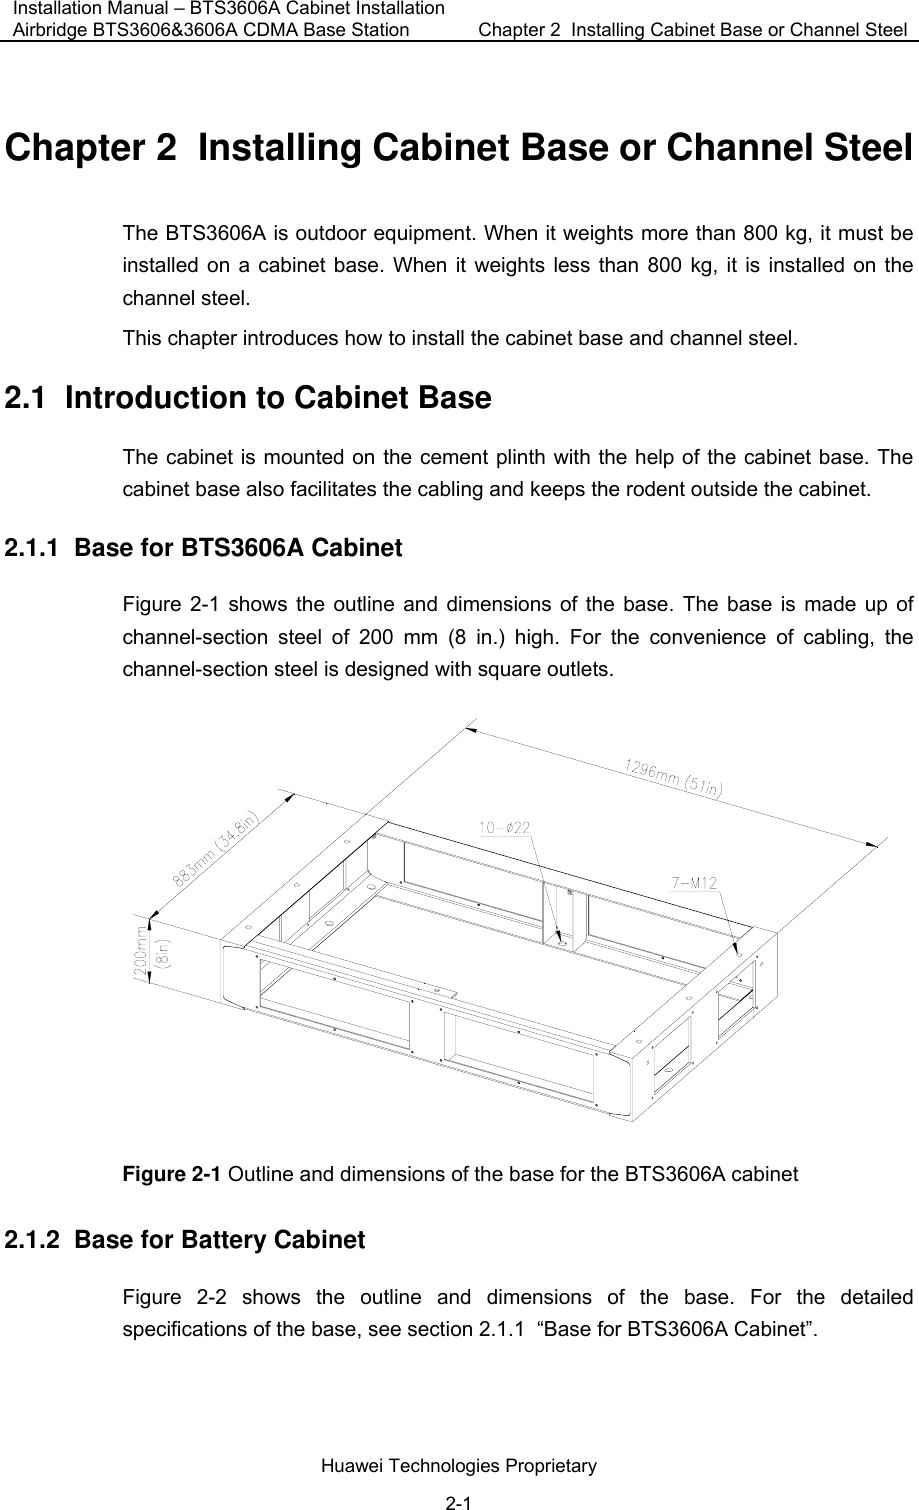 Installation Manual – BTS3606A Cabinet Installation Airbridge BTS3606&amp;3606A CDMA Base Station  Chapter 2  Installing Cabinet Base or Channel Steel  Huawei Technologies Proprietary 2-1 Chapter 2  Installing Cabinet Base or Channel Steel The BTS3606A is outdoor equipment. When it weights more than 800 kg, it must be installed on a cabinet base. When it weights less than 800 kg, it is installed on the channel steel.  This chapter introduces how to install the cabinet base and channel steel. 2.1  Introduction to Cabinet Base The cabinet is mounted on the cement plinth with the help of the cabinet base. The cabinet base also facilitates the cabling and keeps the rodent outside the cabinet. 2.1.1  Base for BTS3606A Cabinet Figure 2-1 shows the outline and dimensions of the base. The base is made up of channel-section steel of 200 mm (8 in.) high. For the convenience of cabling, the channel-section steel is designed with square outlets.  Figure 2-1 Outline and dimensions of the base for the BTS3606A cabinet 2.1.2  Base for Battery Cabinet Figure 2-2 shows the outline and dimensions of the base. For the detailed specifications of the base, see section 2.1.1  “Base for BTS3606A Cabinet”. 